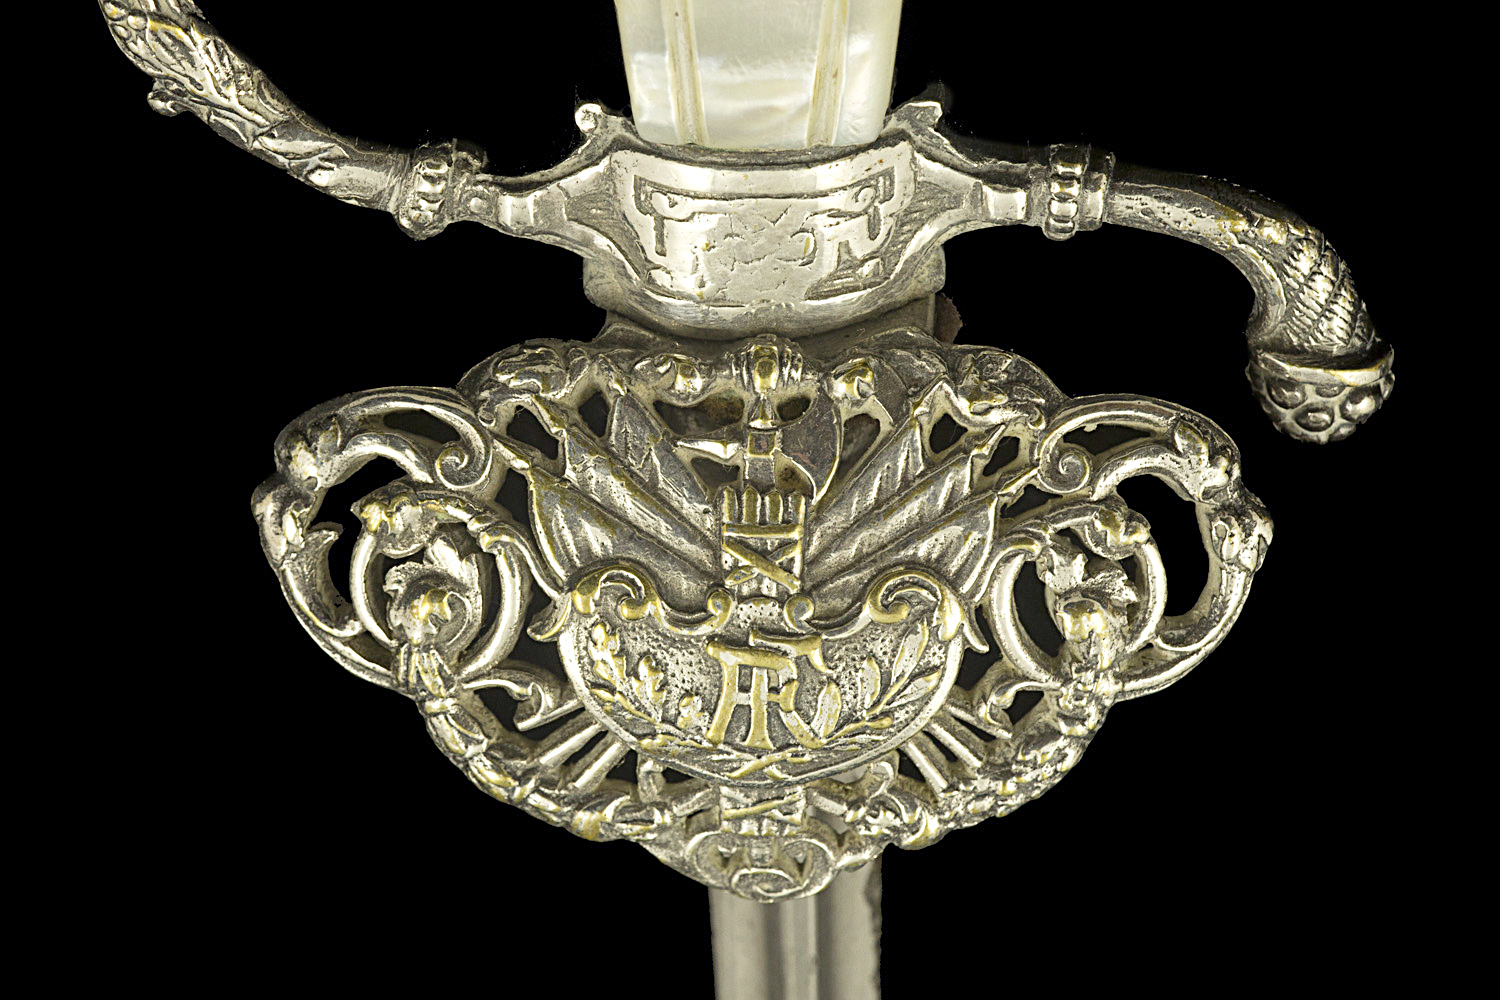 S000090_French_3rd_Republic_Smallsword_Detail_Shell_Obverse